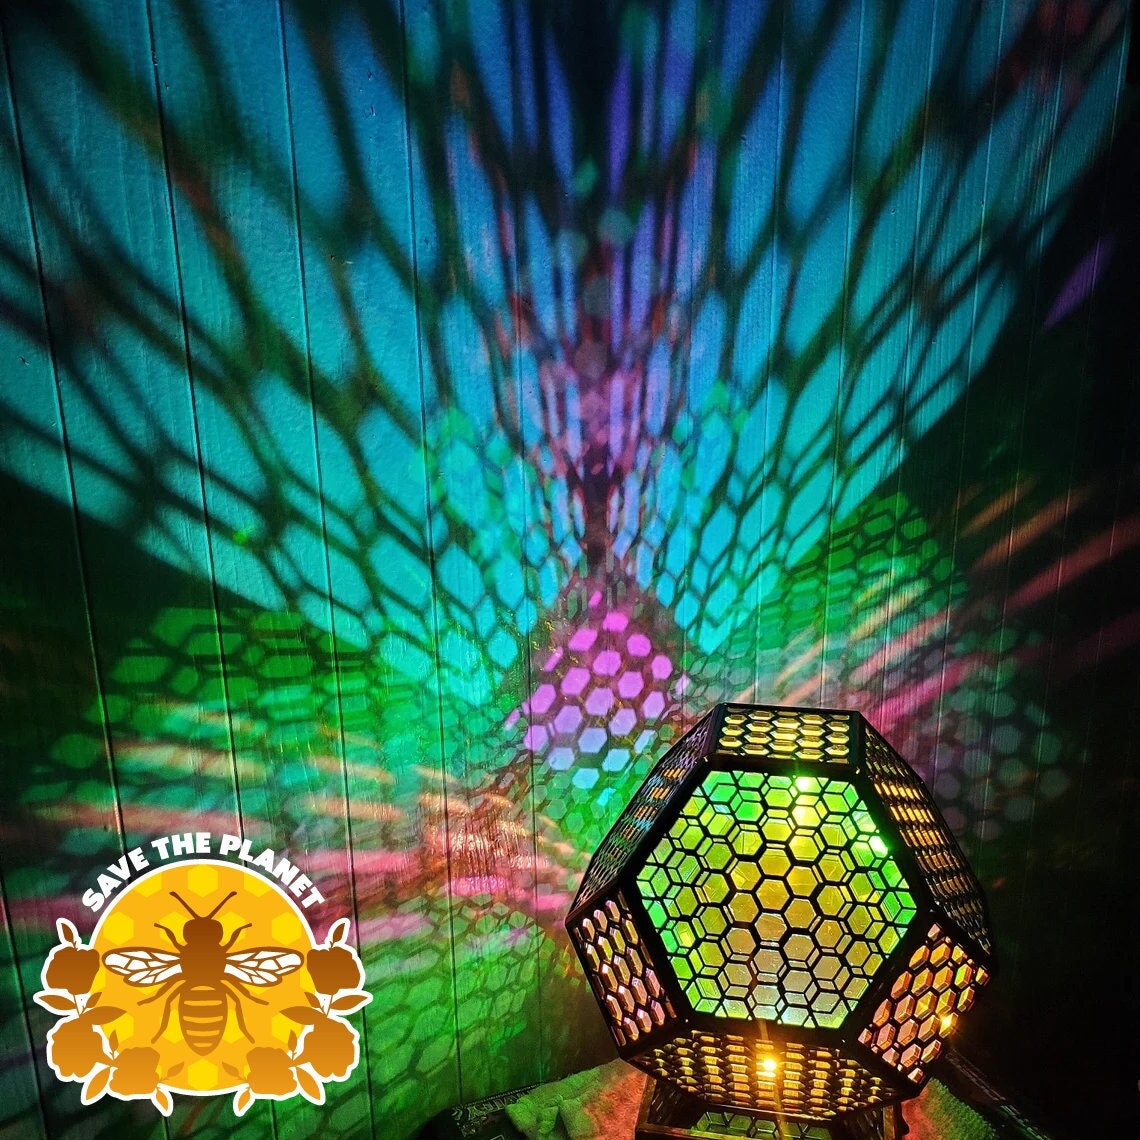 Fantasy Geometry Space LED Art Lamp Infinity Dodecaedron Color Art Light  USB Charging Christmas Gifts Decorations Night Light